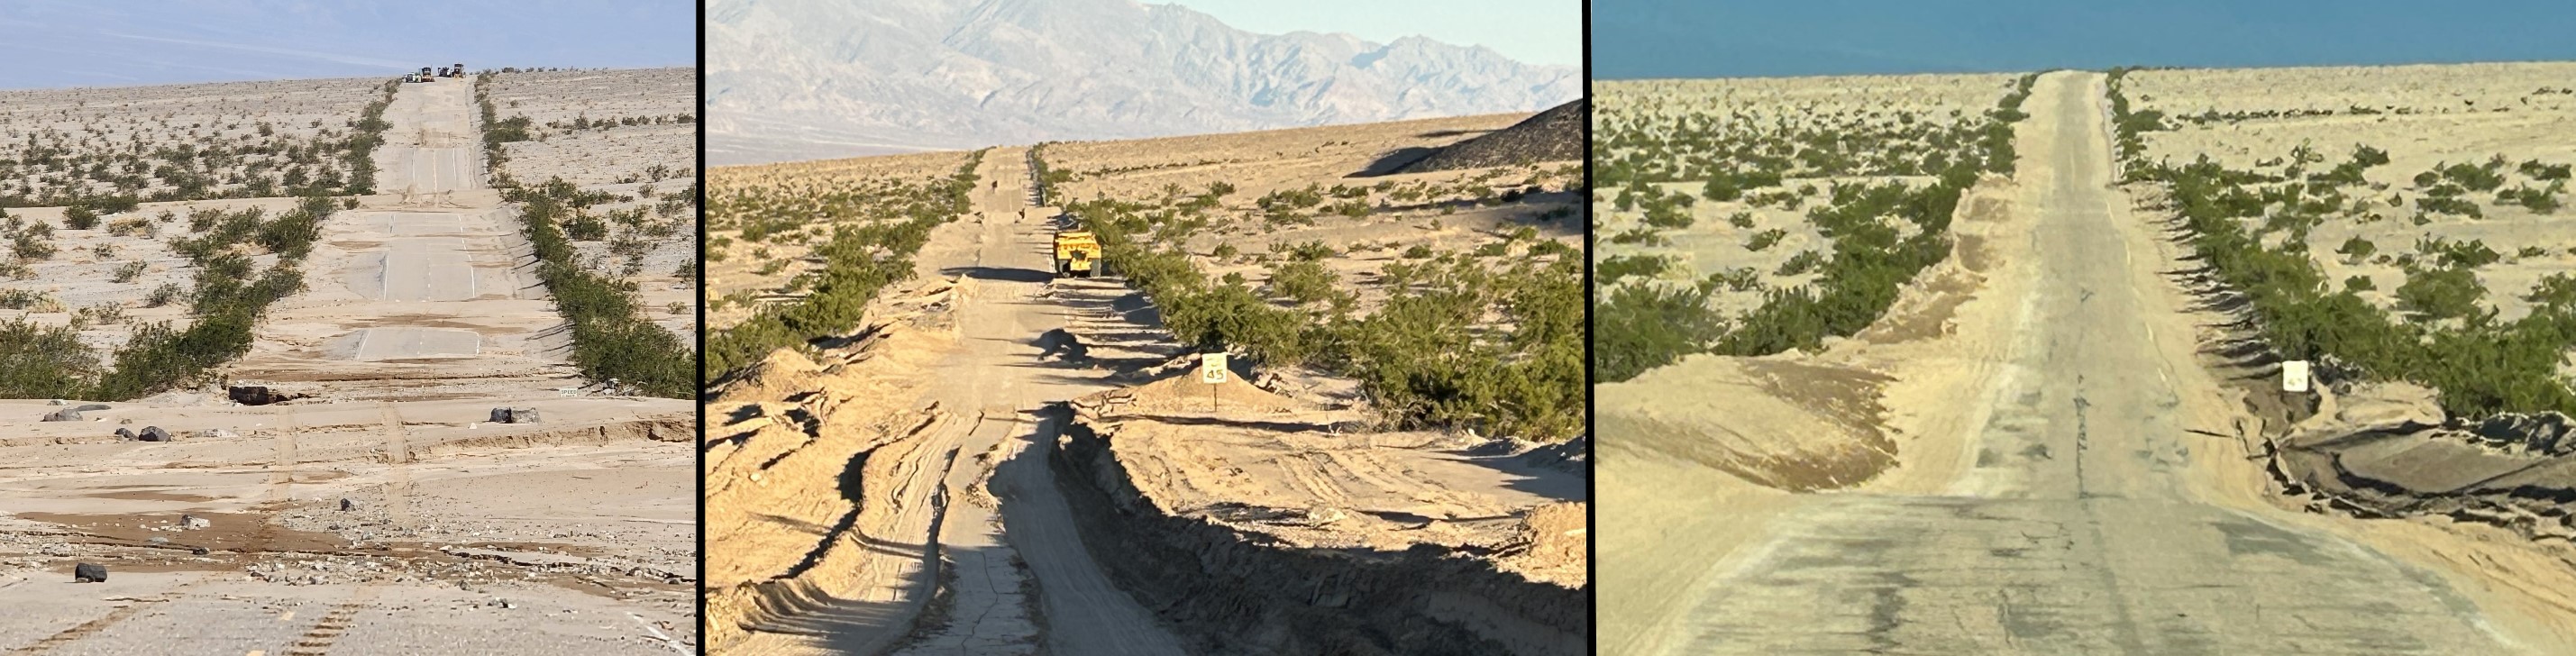 Three photos of the same view of Badwater Road . Photo on left shows just the top of a speed limit sign sticking out of gravel. The middle photo shows one lane plowed through gravel. The photo on right shows the road fully cleared.